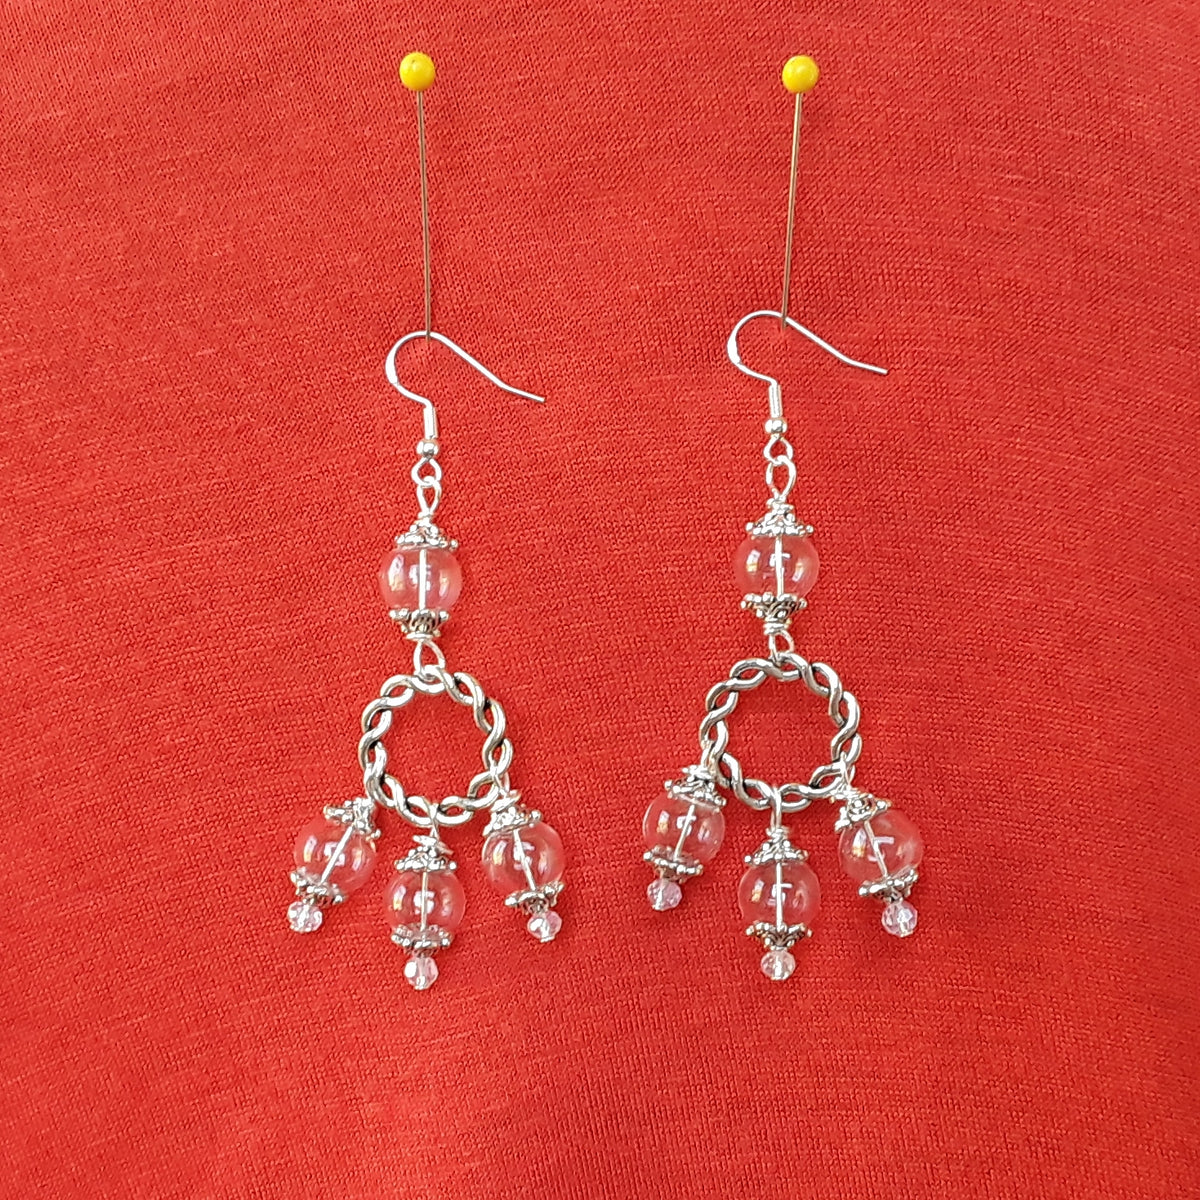 Unique Clear Glass Bubble Chandelier Earrings in Tibetan Silver or Gold Plated - Unique Bridal Statement Long Dangles